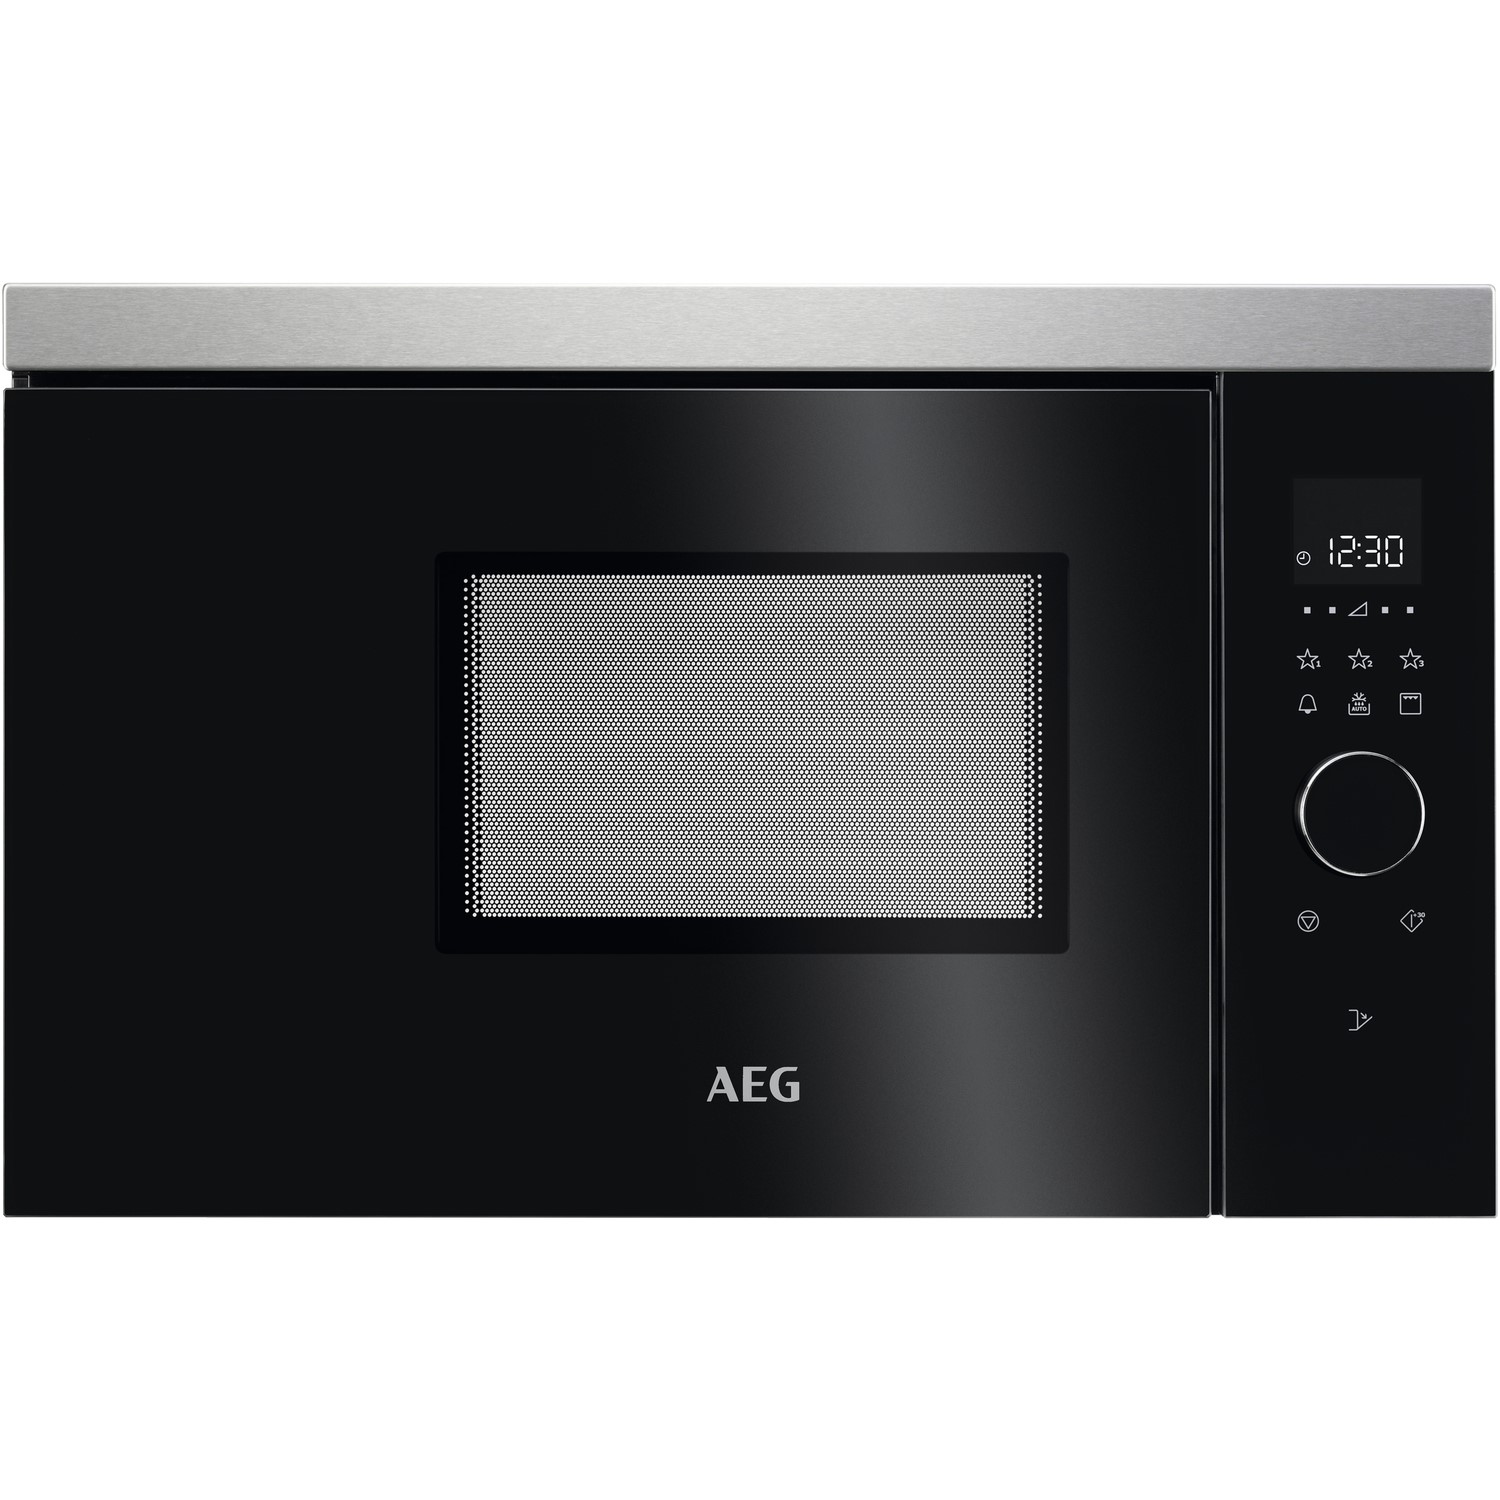 AEG 17L 800W Built In Microwave with Grill - Black